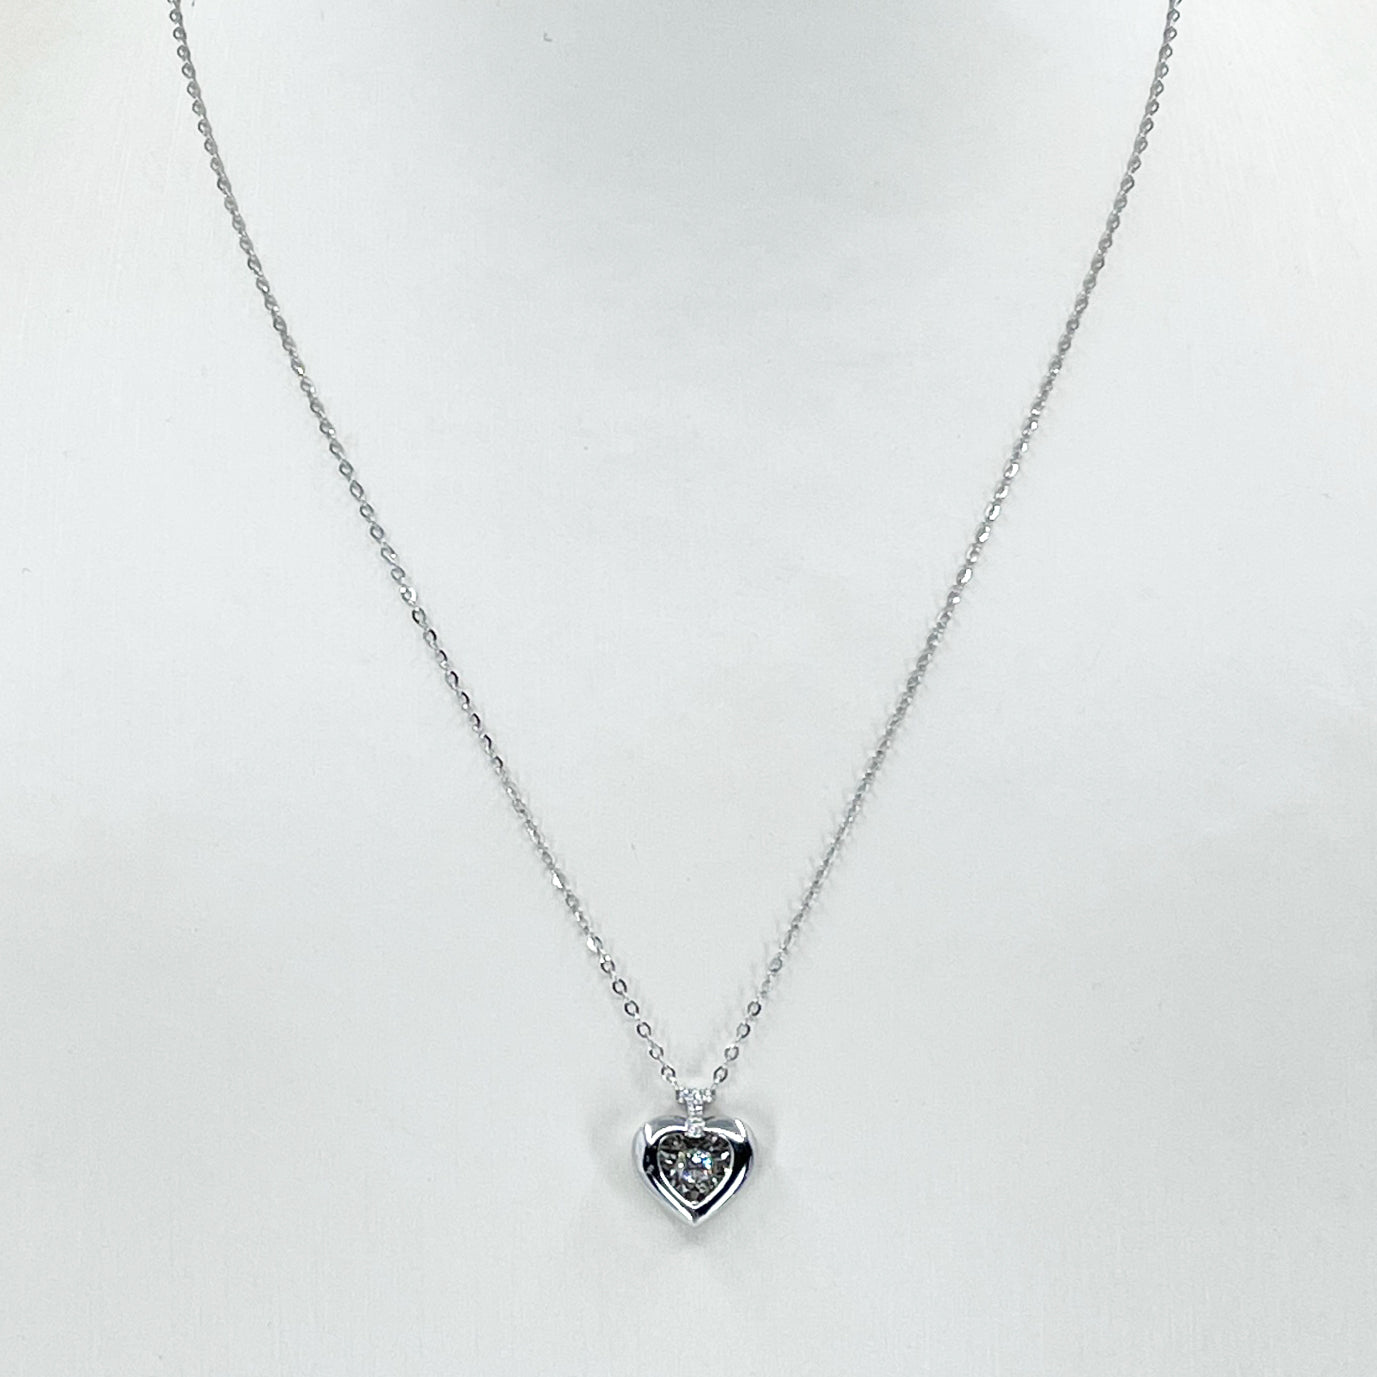 18K Solid White Gold Round Link Chain Necklace with Diamond Heart Pendant 16